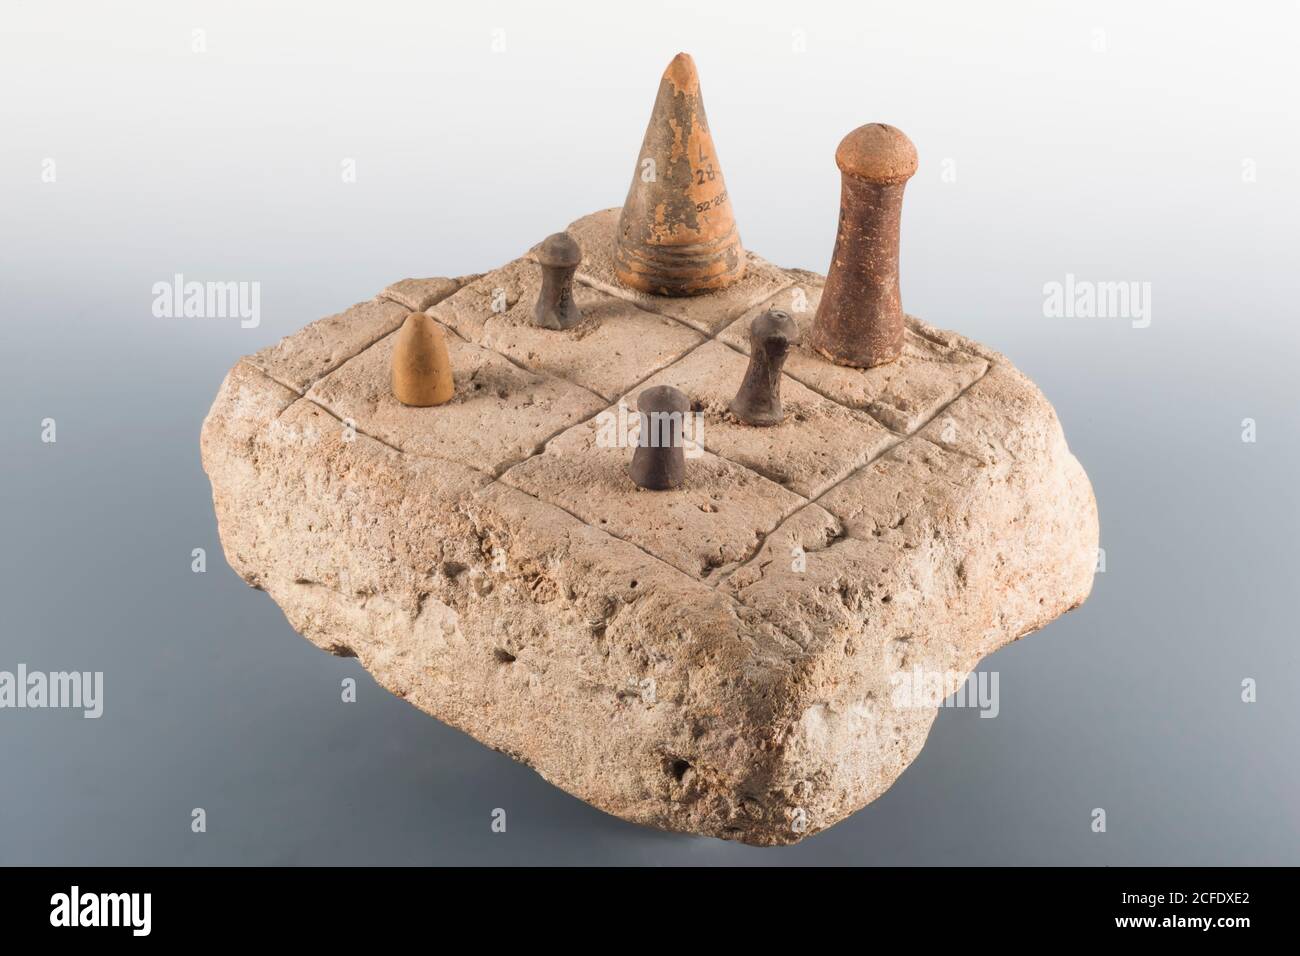 Oldest chess game board, Mohenjo daro, Indus valley civilization Gallery, National Museum of Pakistan, Karachi, Sindh, Pakistan, South Asia, Asia Stock Photo